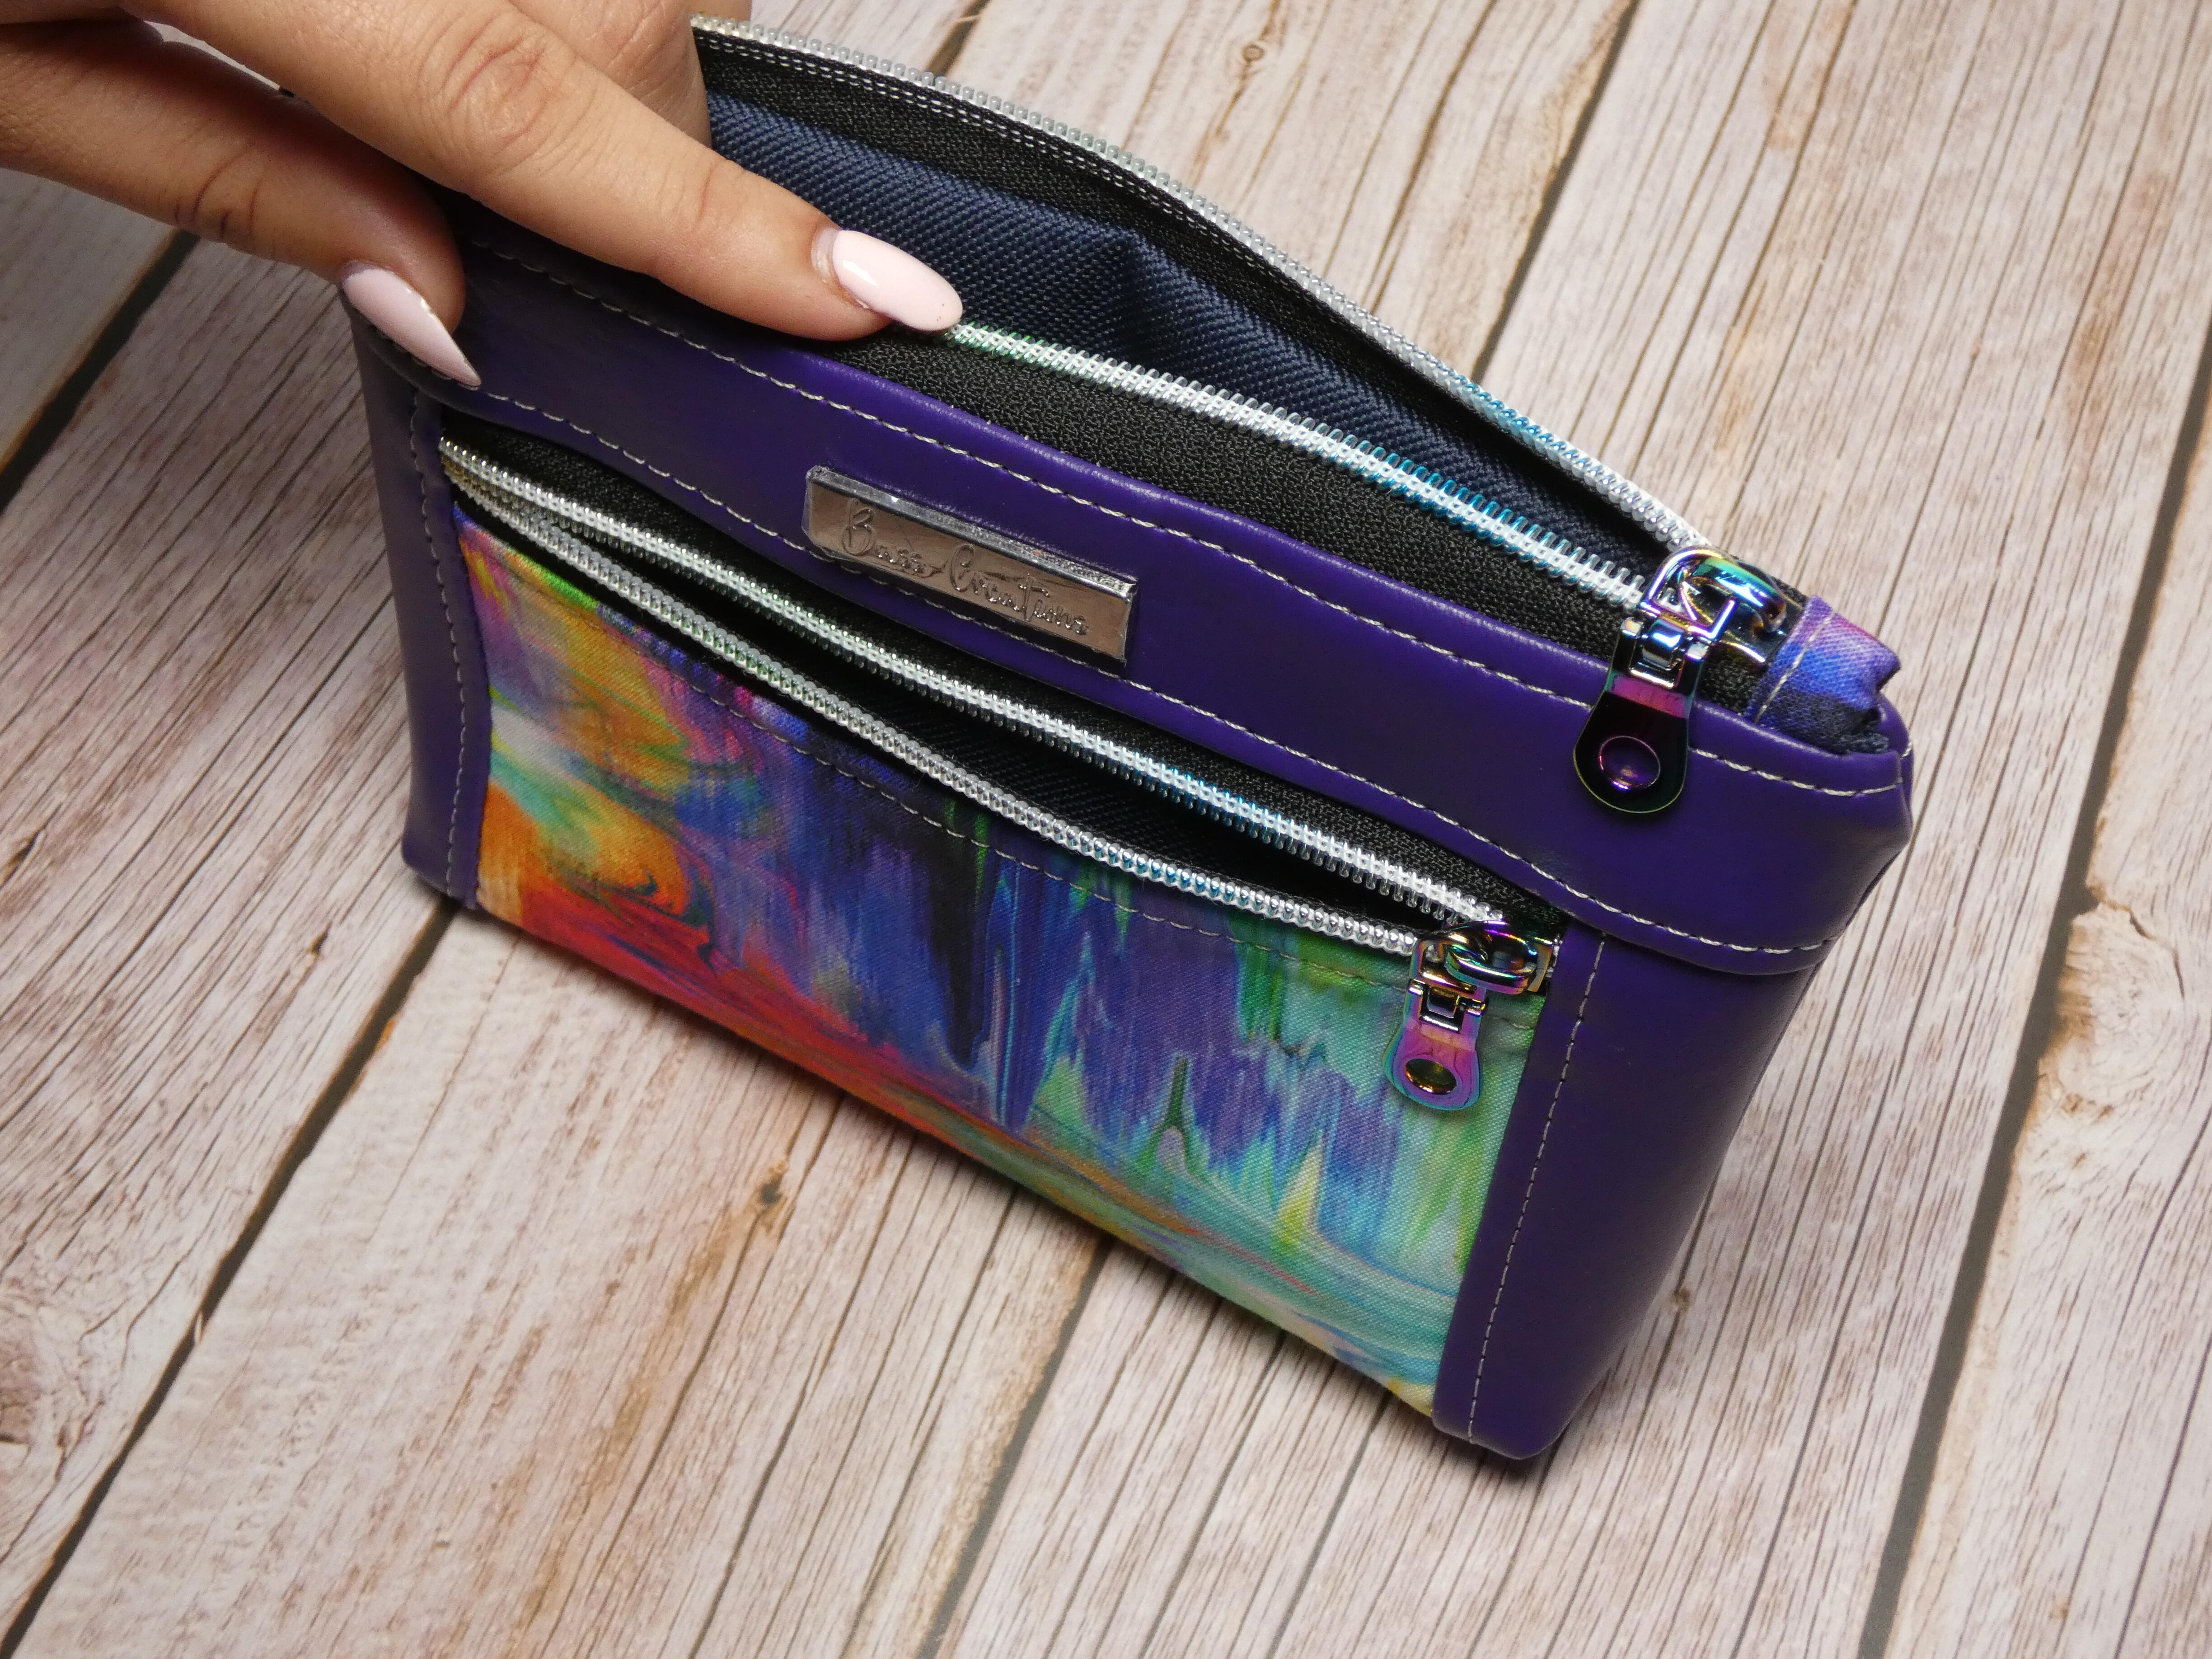 Top view of of a medium makeup pouch with a colorful blurred print fabric and purple faux leather accents. Also showing are the silver toned zipper teeth with silver zipper pulls.